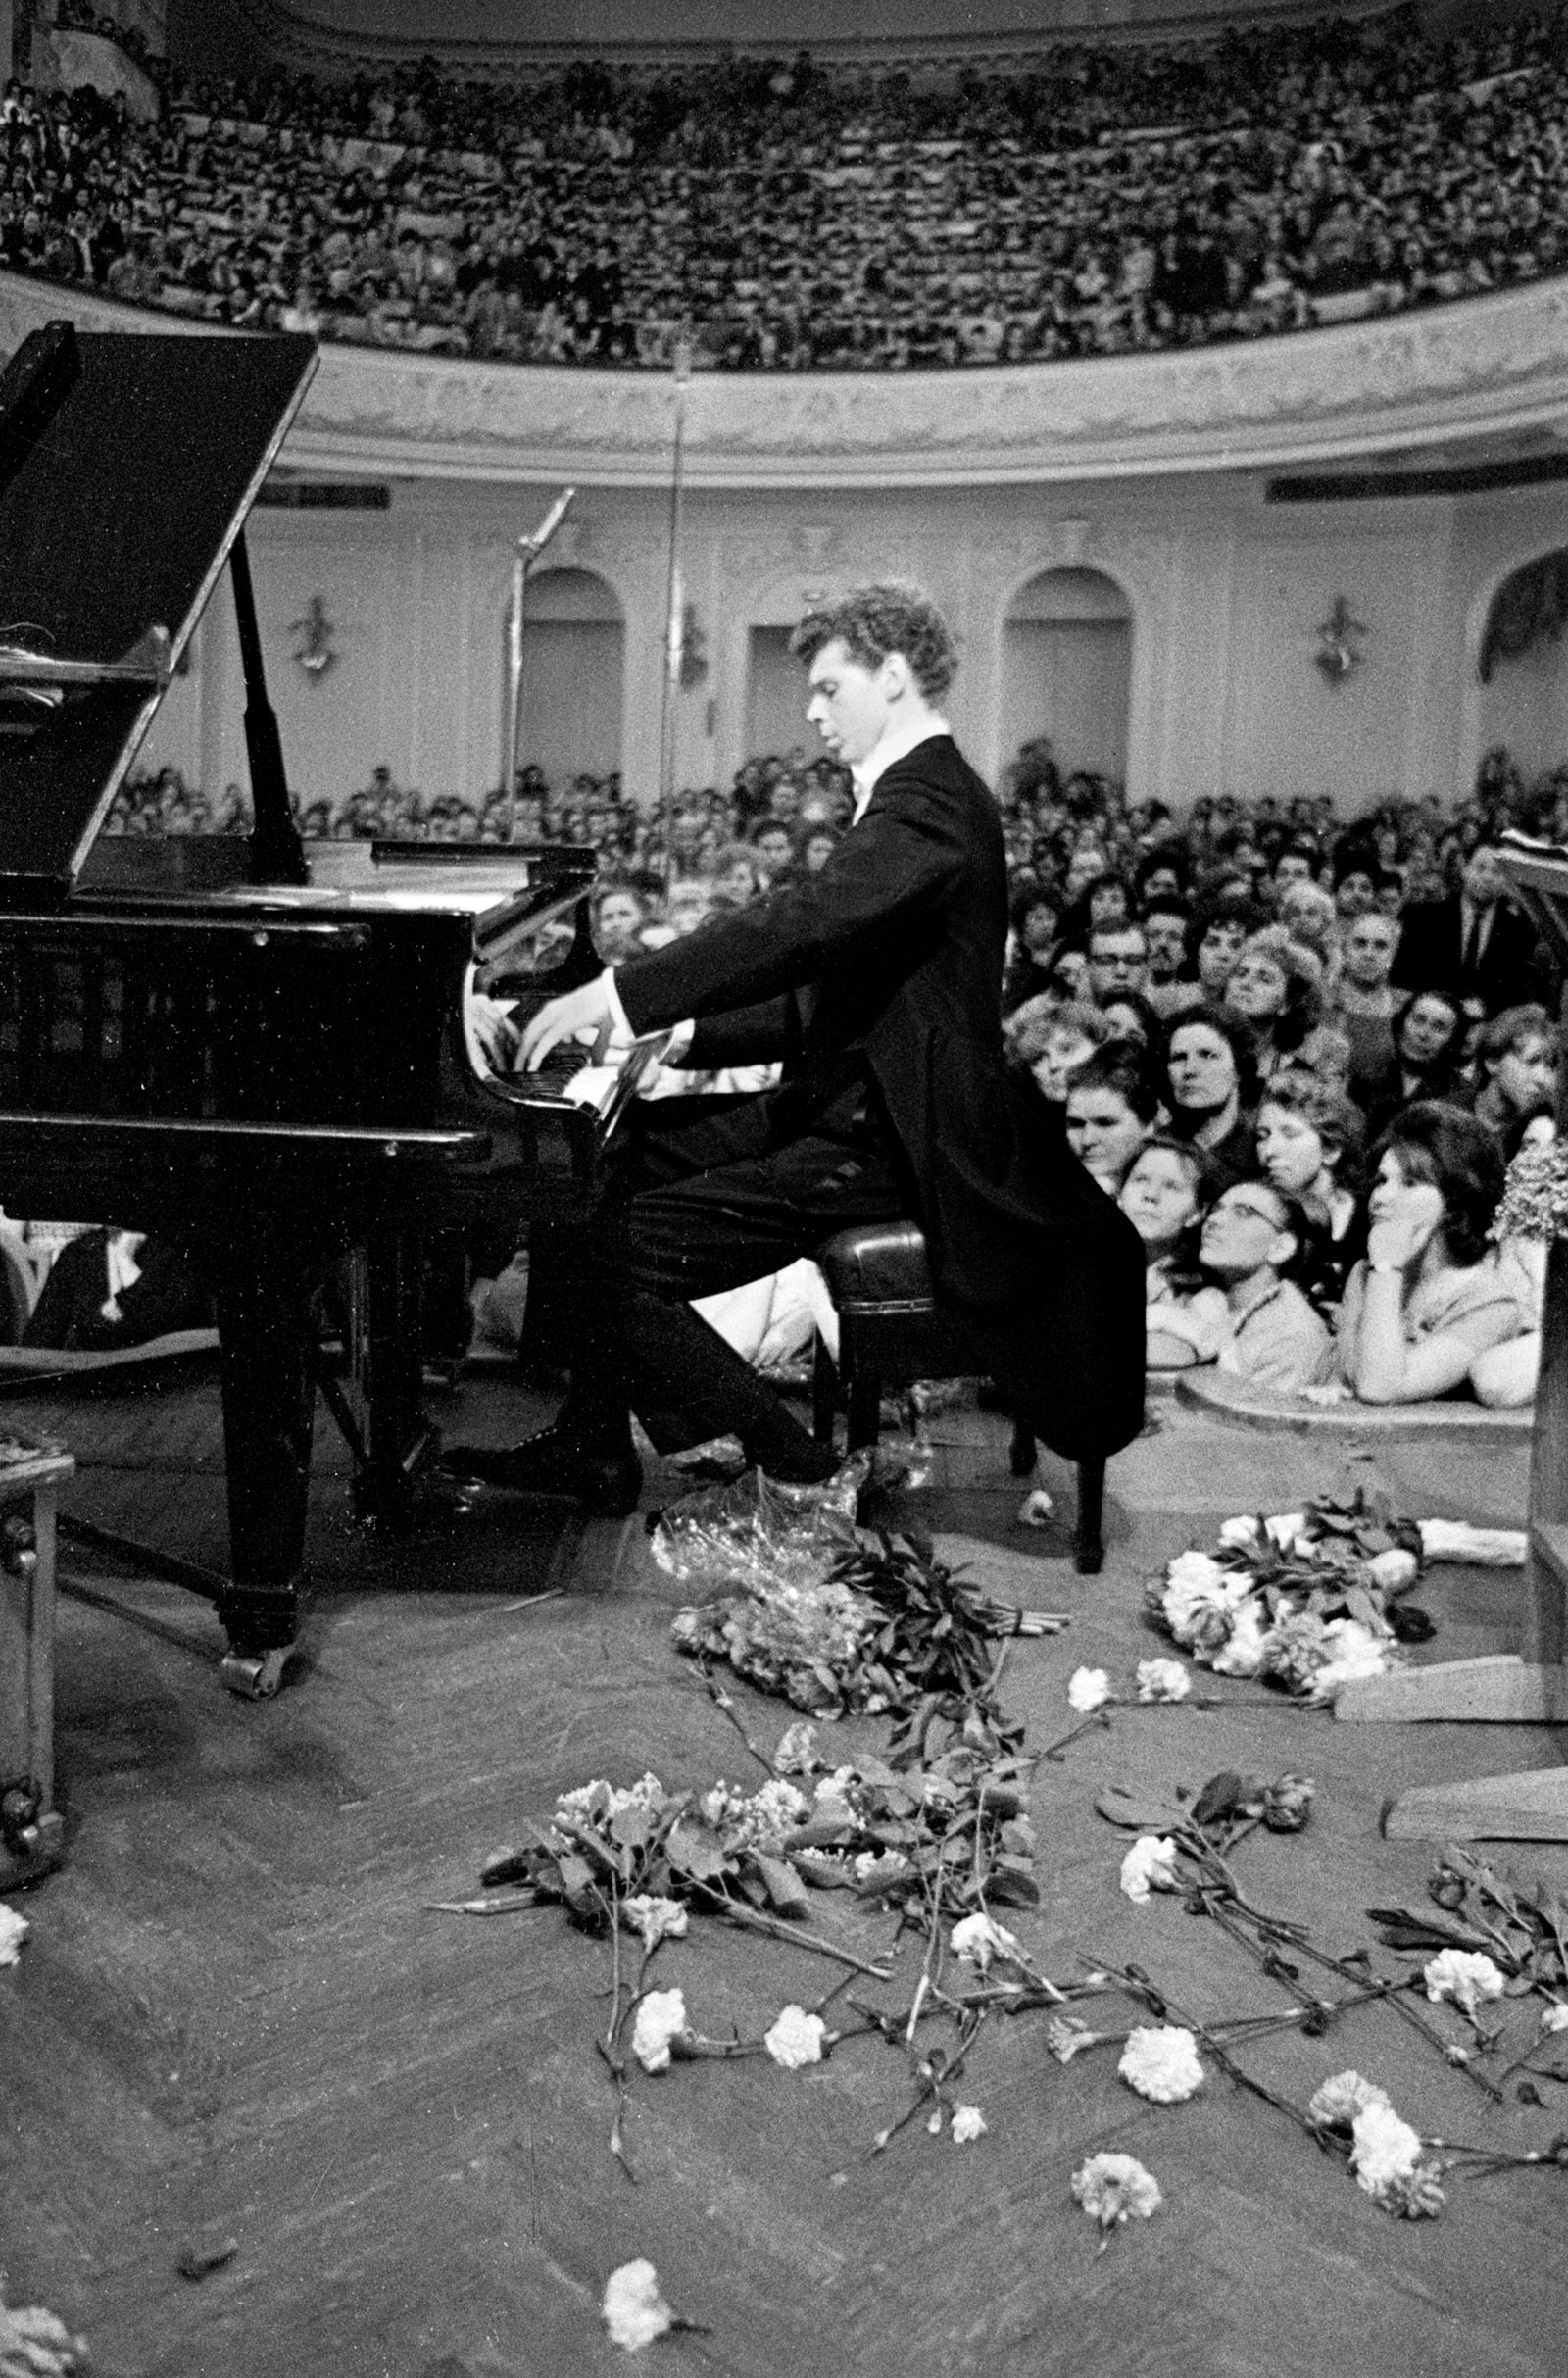 Van Cliburn performing in the Great Hall of the Moscow Conservatory during the first Tchaikovsky International Competition, which he won, April 1958